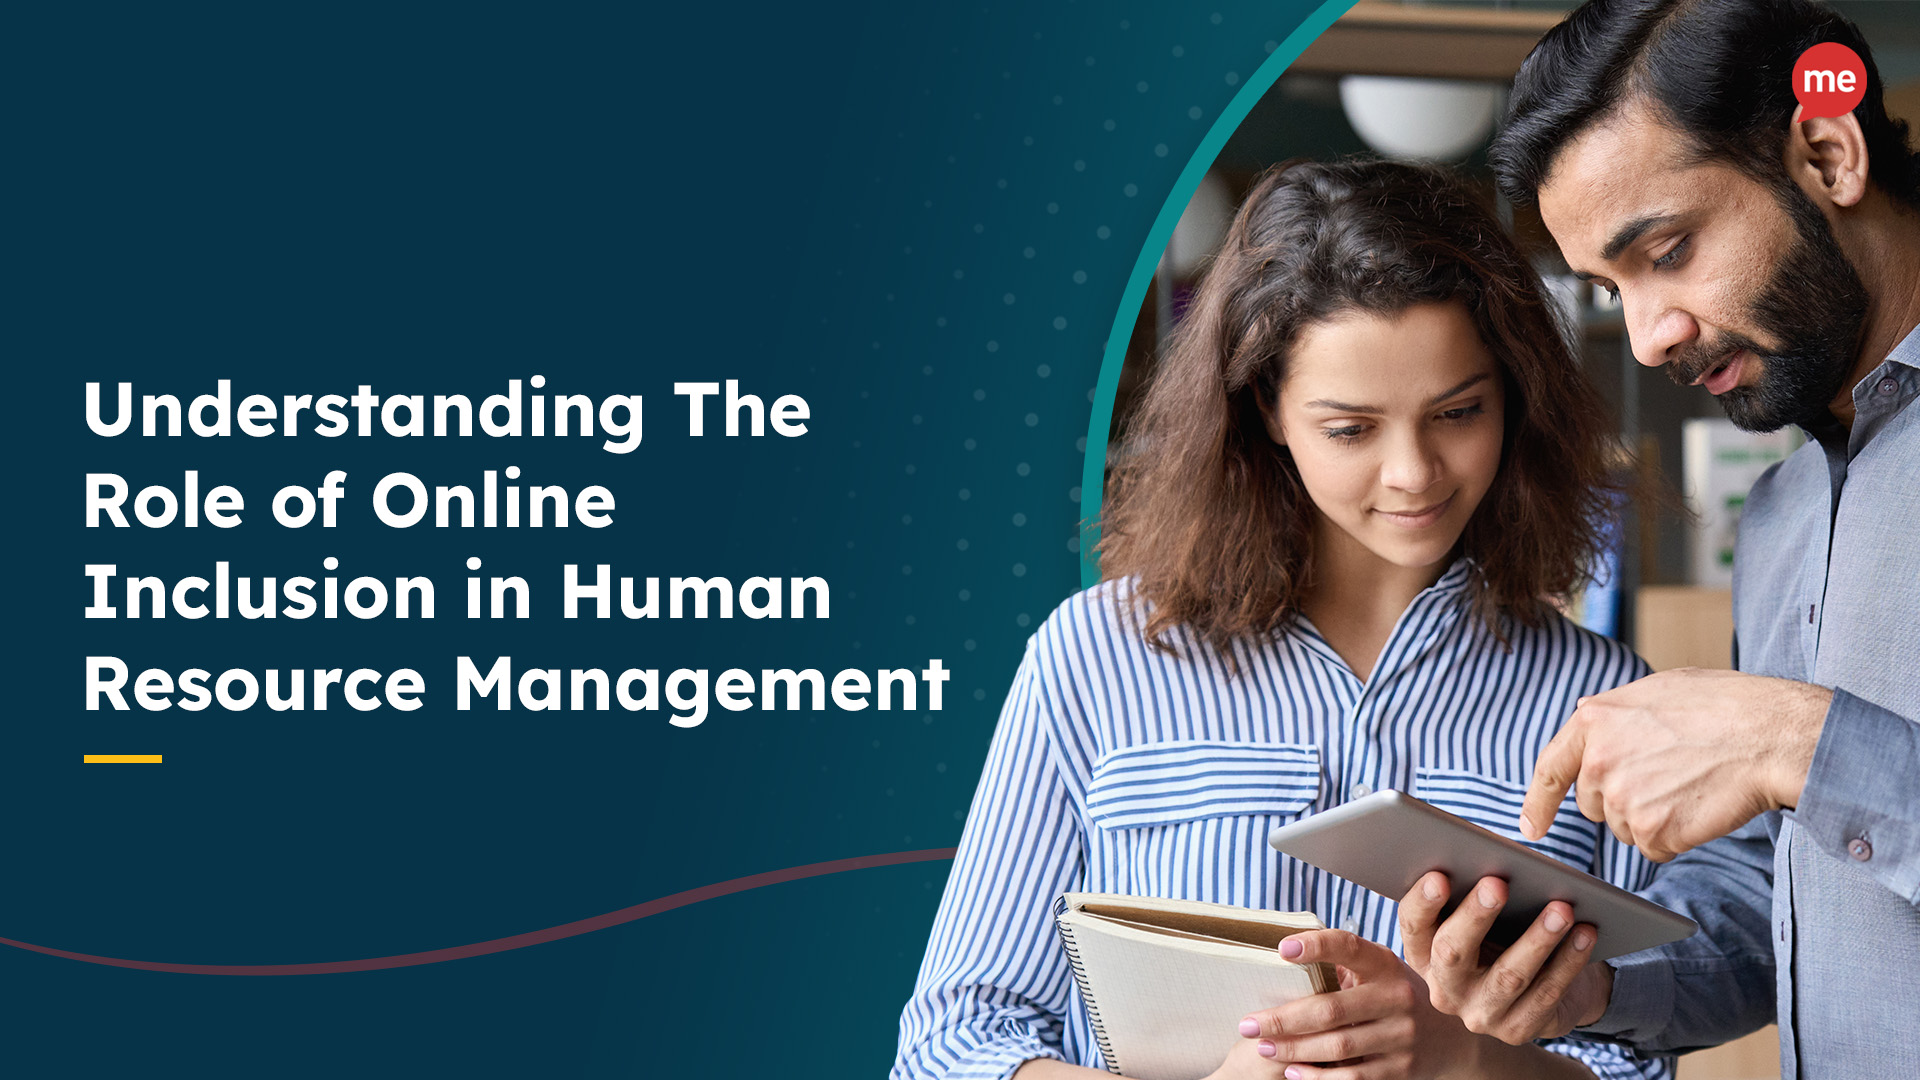 Understanding the role of online inclusion in human resource management